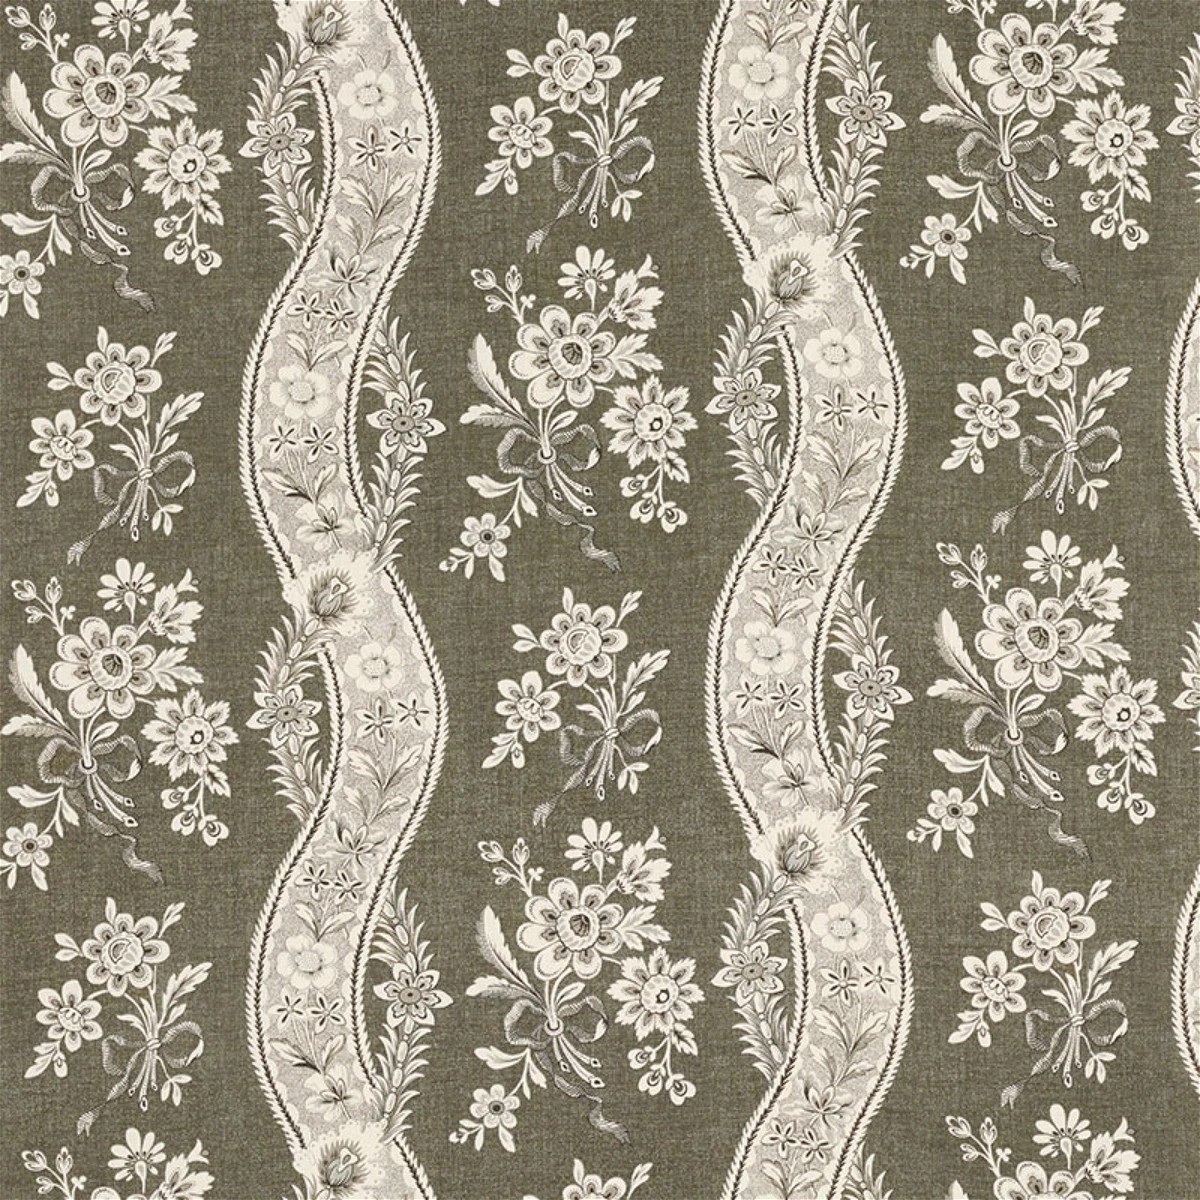 The image of an Le Castellet Fabric product